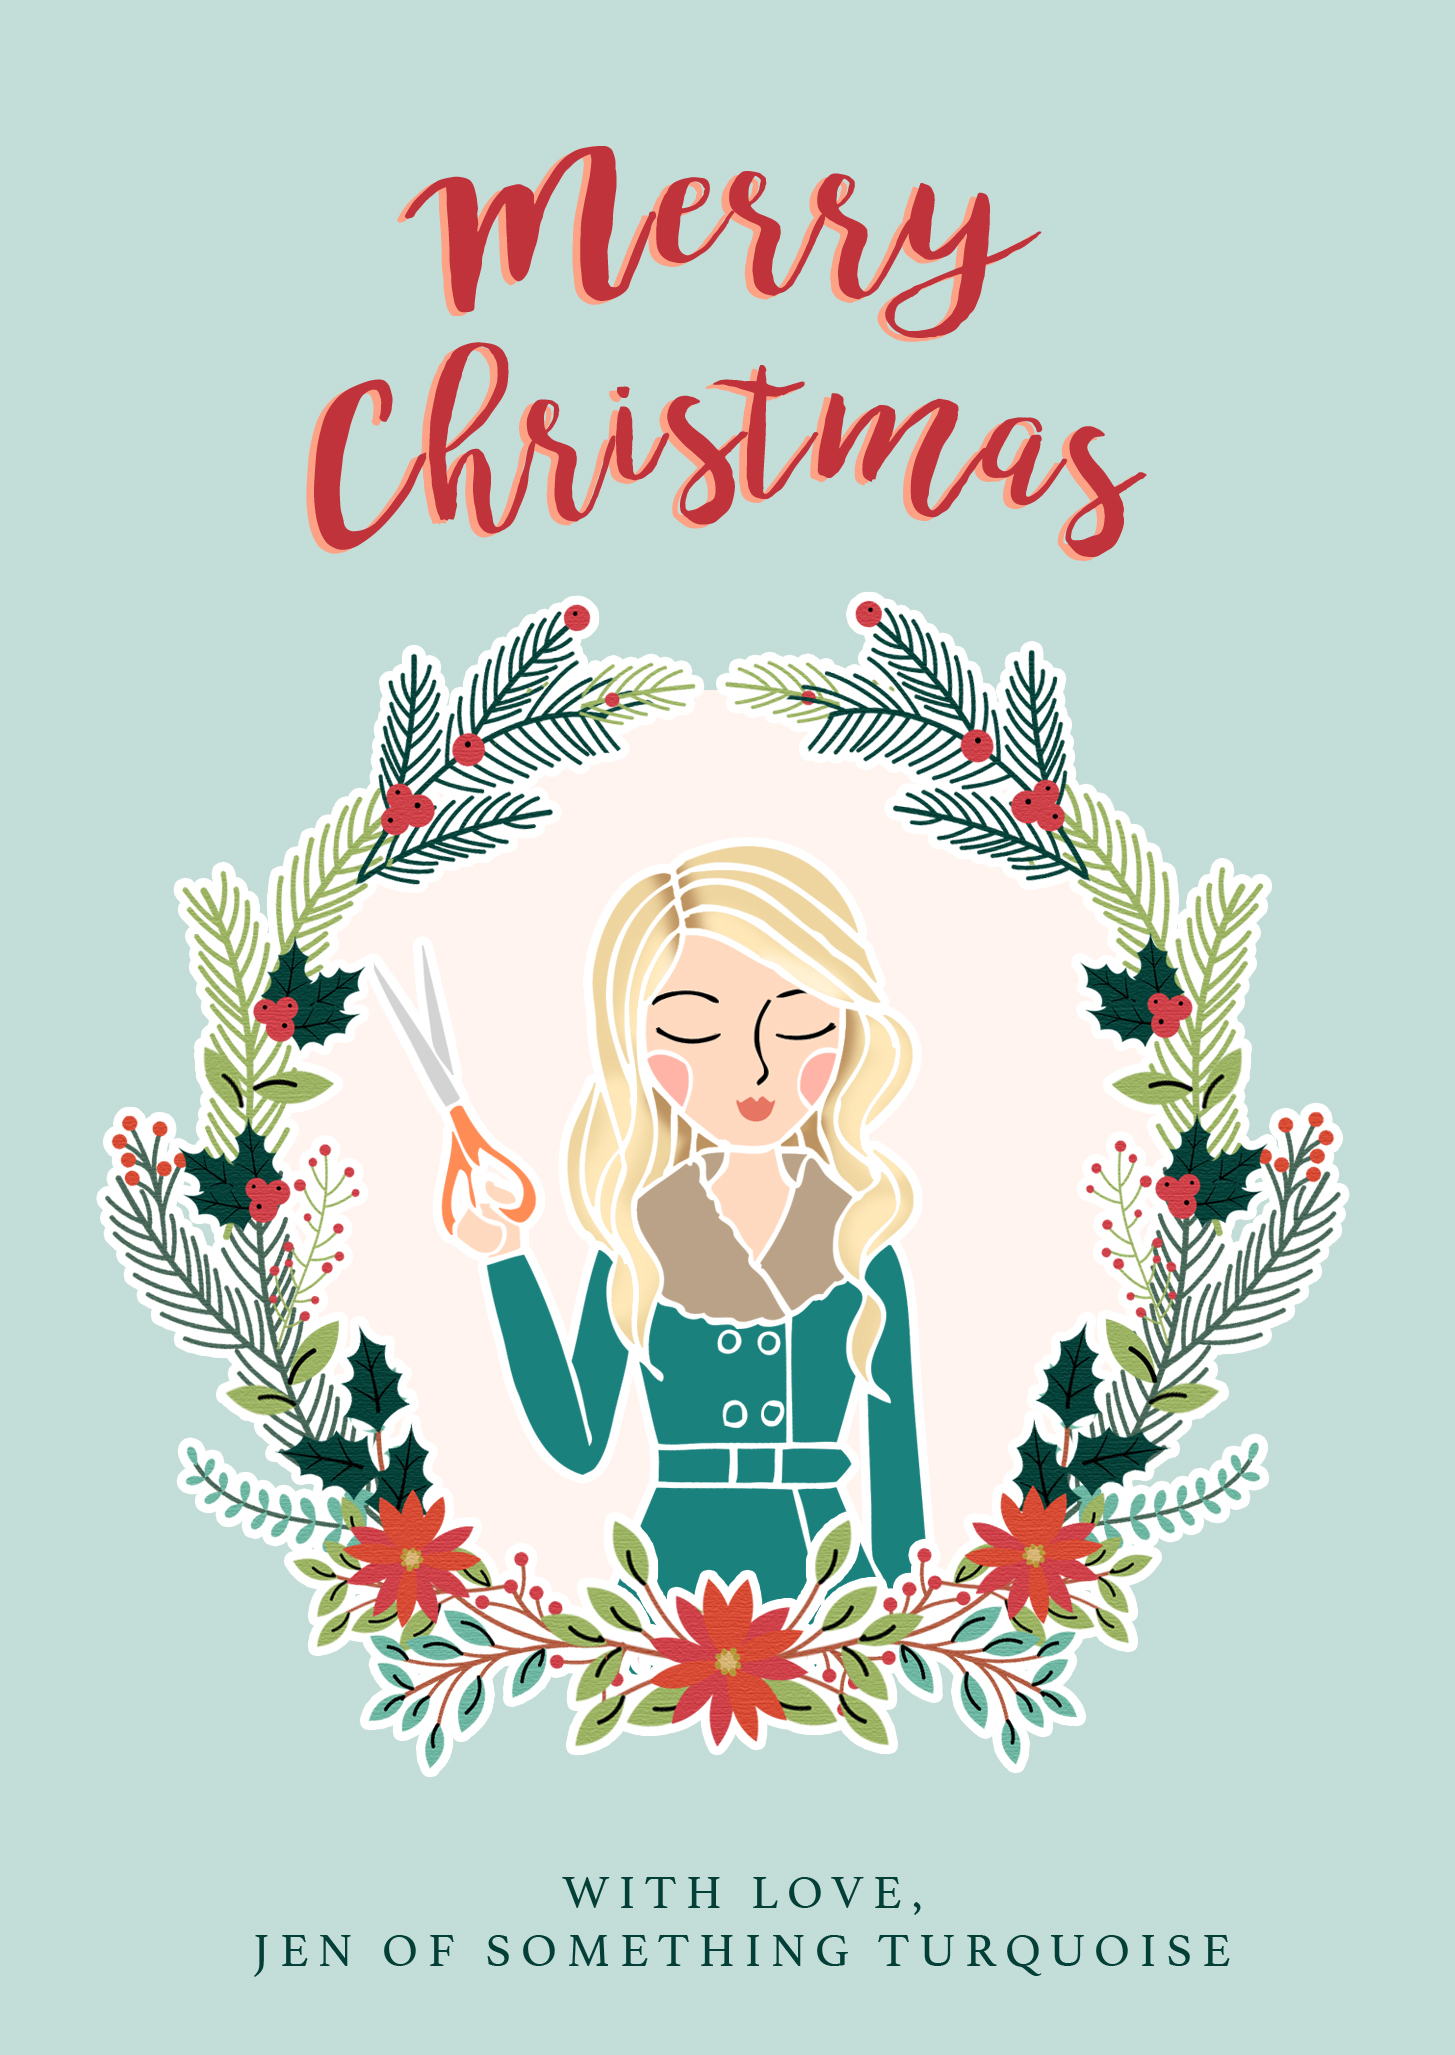 Merry Christmas from Jen of Something Turquoise, by Lily and Threads